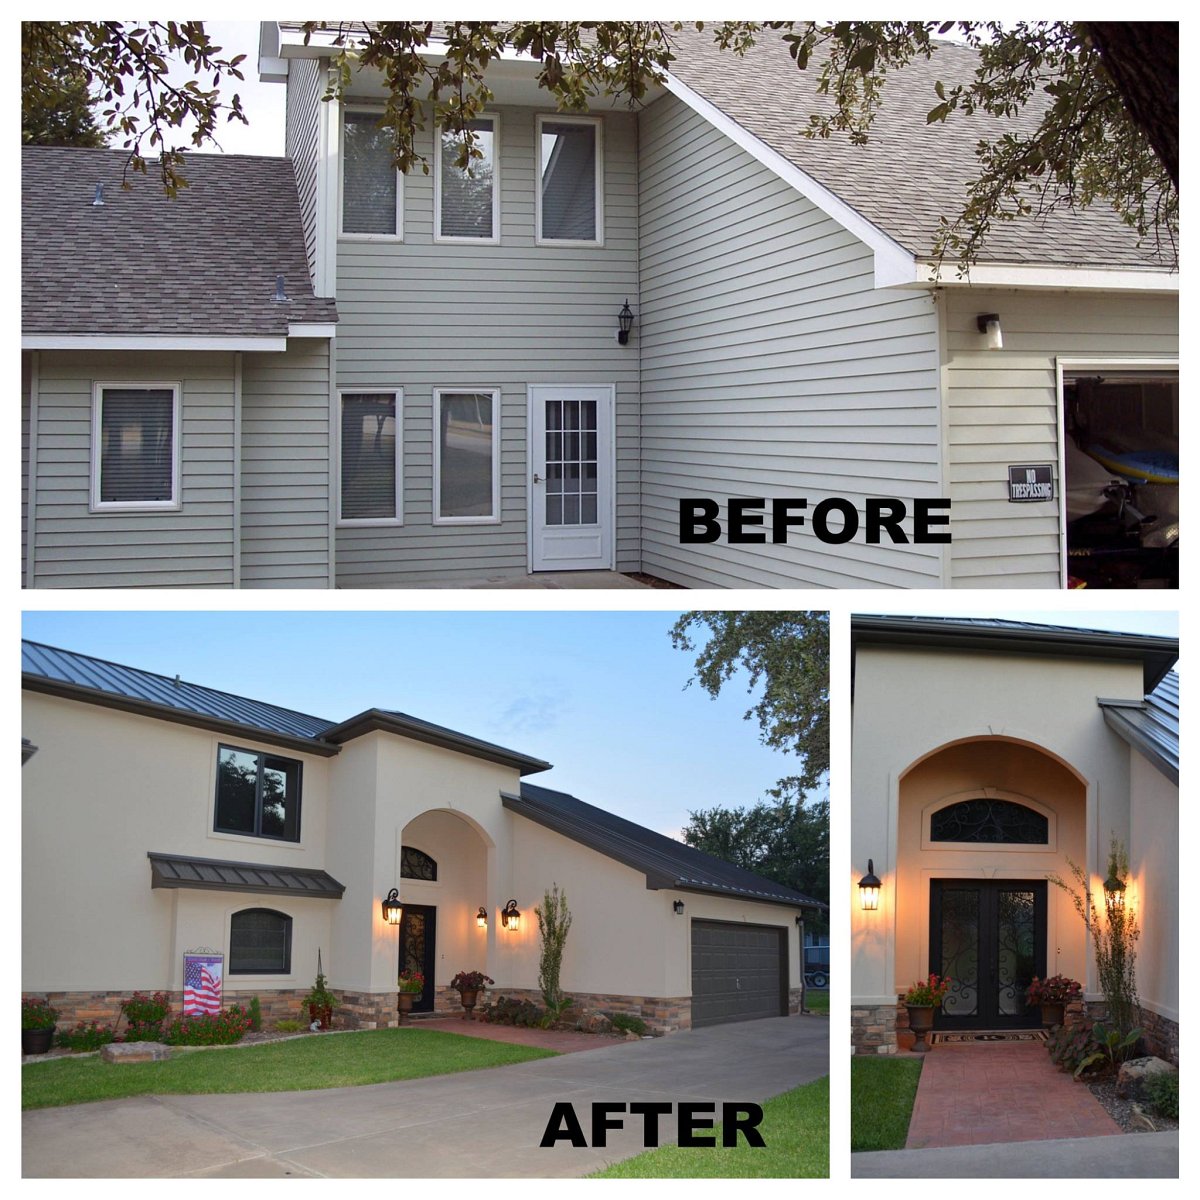 Before and after home remodeling by Bobby Wolfe Construction